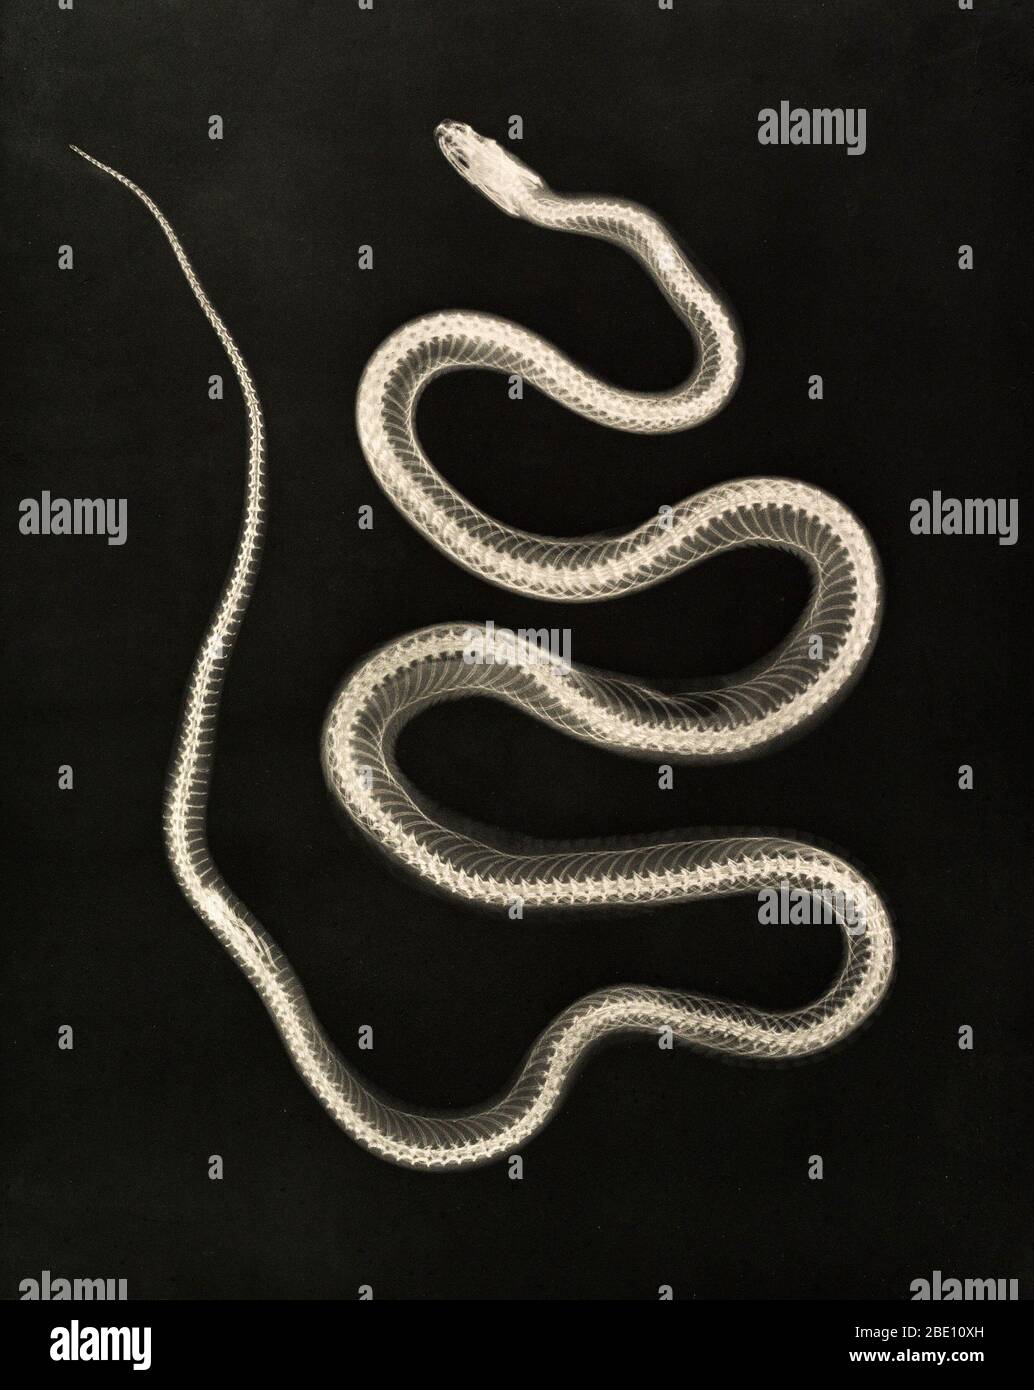 Historical X-ray of an Aesculapian snake, 1896. The Aesculapian snake (now Zamenis longissimus, previously Elaphe longissima), is a species of nonvenomous snake native to Europe. Growing up to 2 metres (6.6 ft) in total length, it has been of cultural and historical significance for its role in ancient Greek and Roman mythology and derived symbolism. Taken by Josef Maria Eder (Austrian, 1855-1944) and Eduard Valenta (Austrian, 1857-1937). Photogravure. Eder was the director of an institute for graphic processes and the author of an early history of photography. With the photochemist Valenta, h Stock Photo